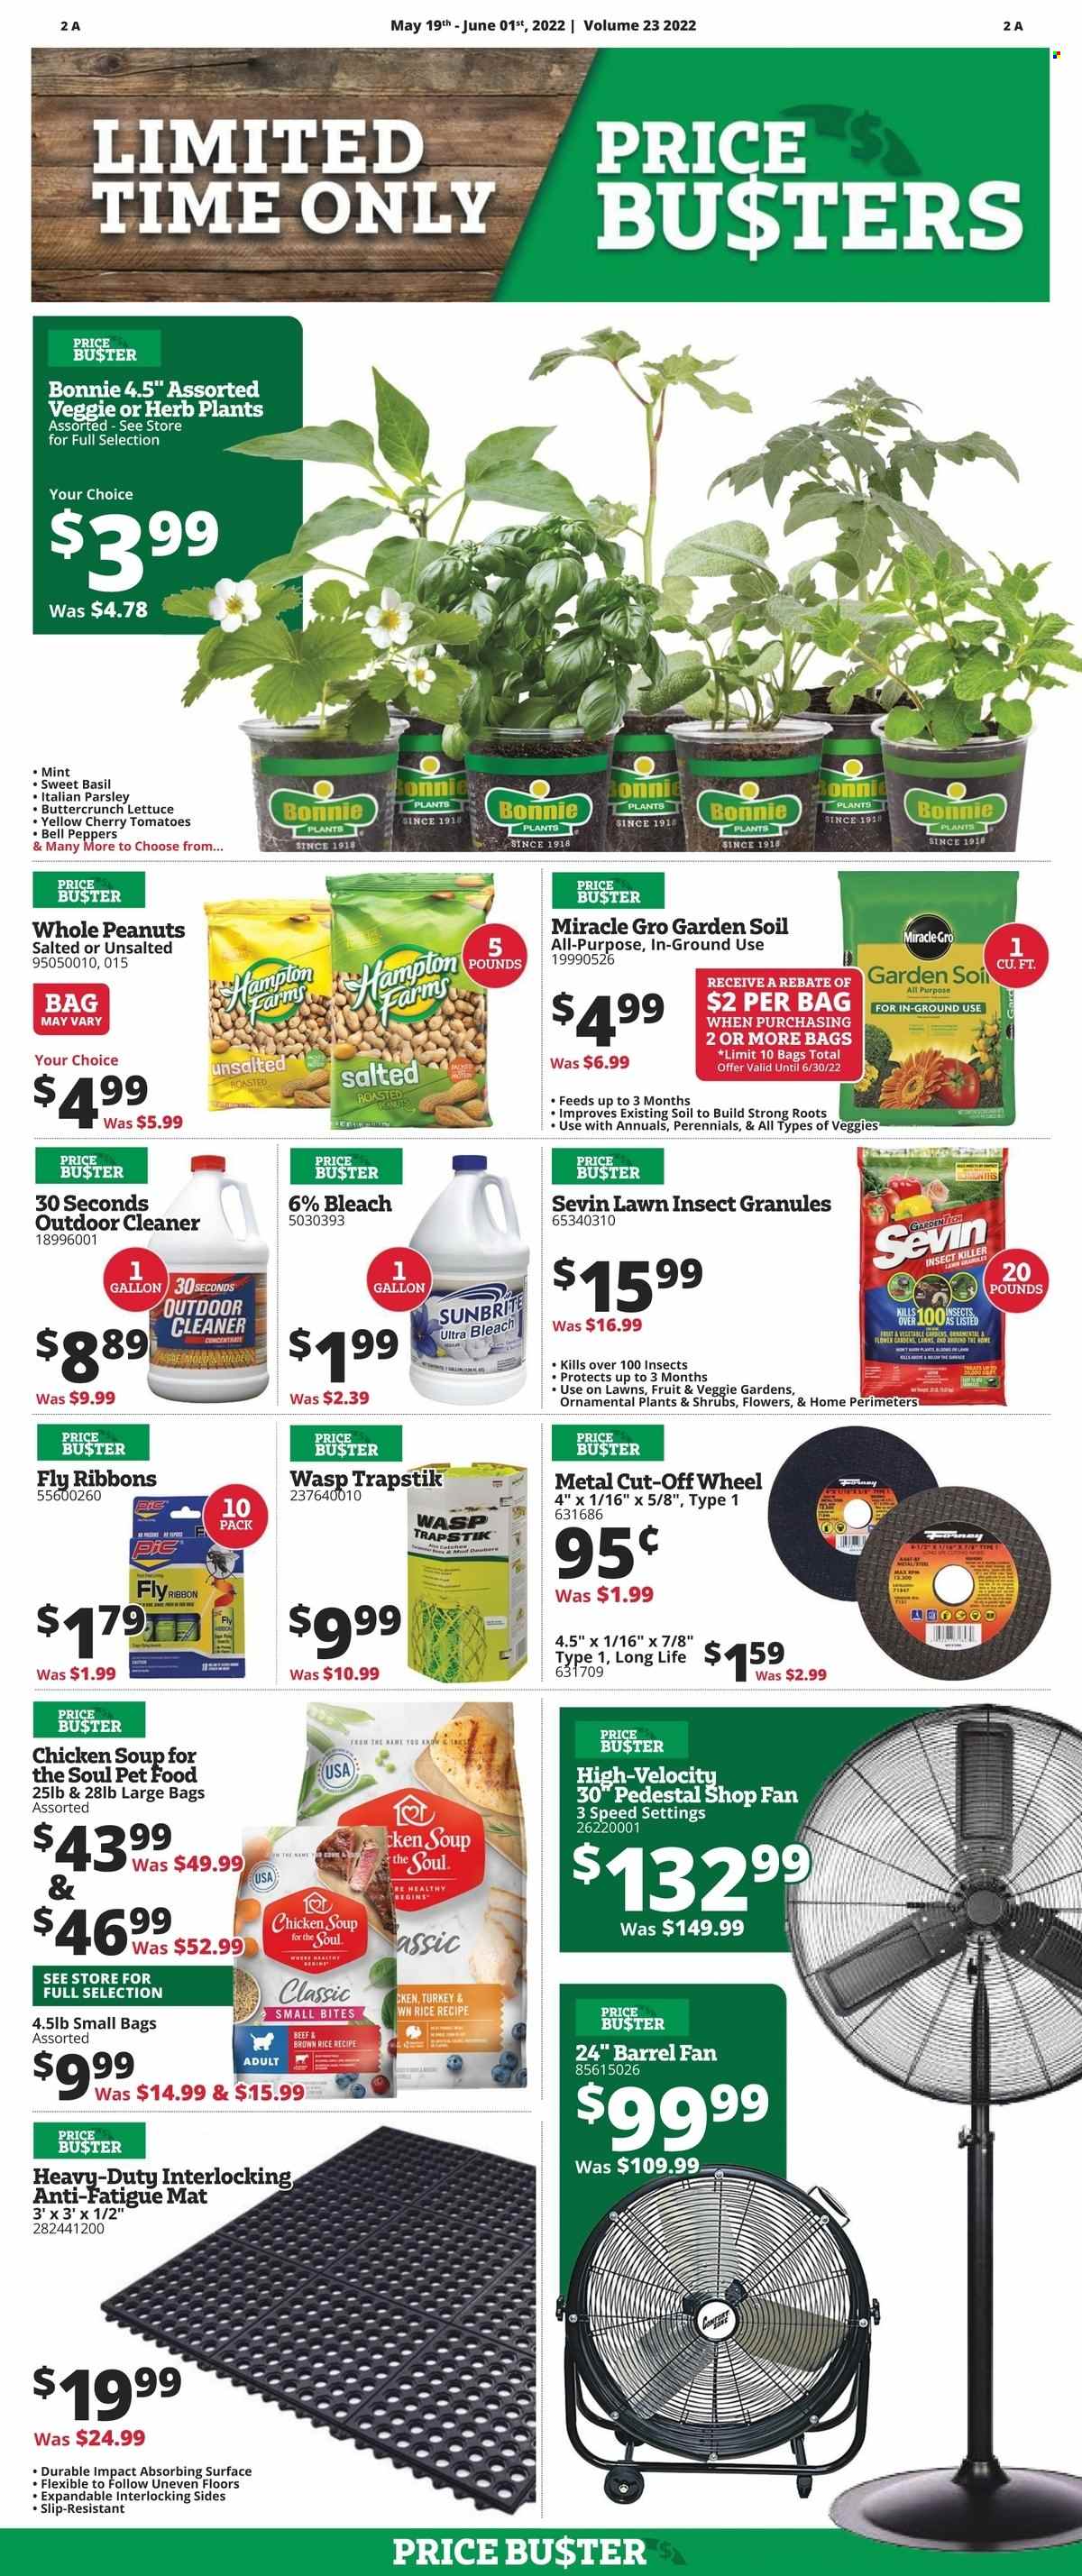 thumbnail - Rural King Flyer - 05/19/2022 - 06/01/2022 - Sales products - soup, brown rice, esponja, parsley, peanuts, bleach, bag, gallon, animal food, Chicken Soup for the Soul, anti-fatigue mat, garden soil, cleaner. Page 5.